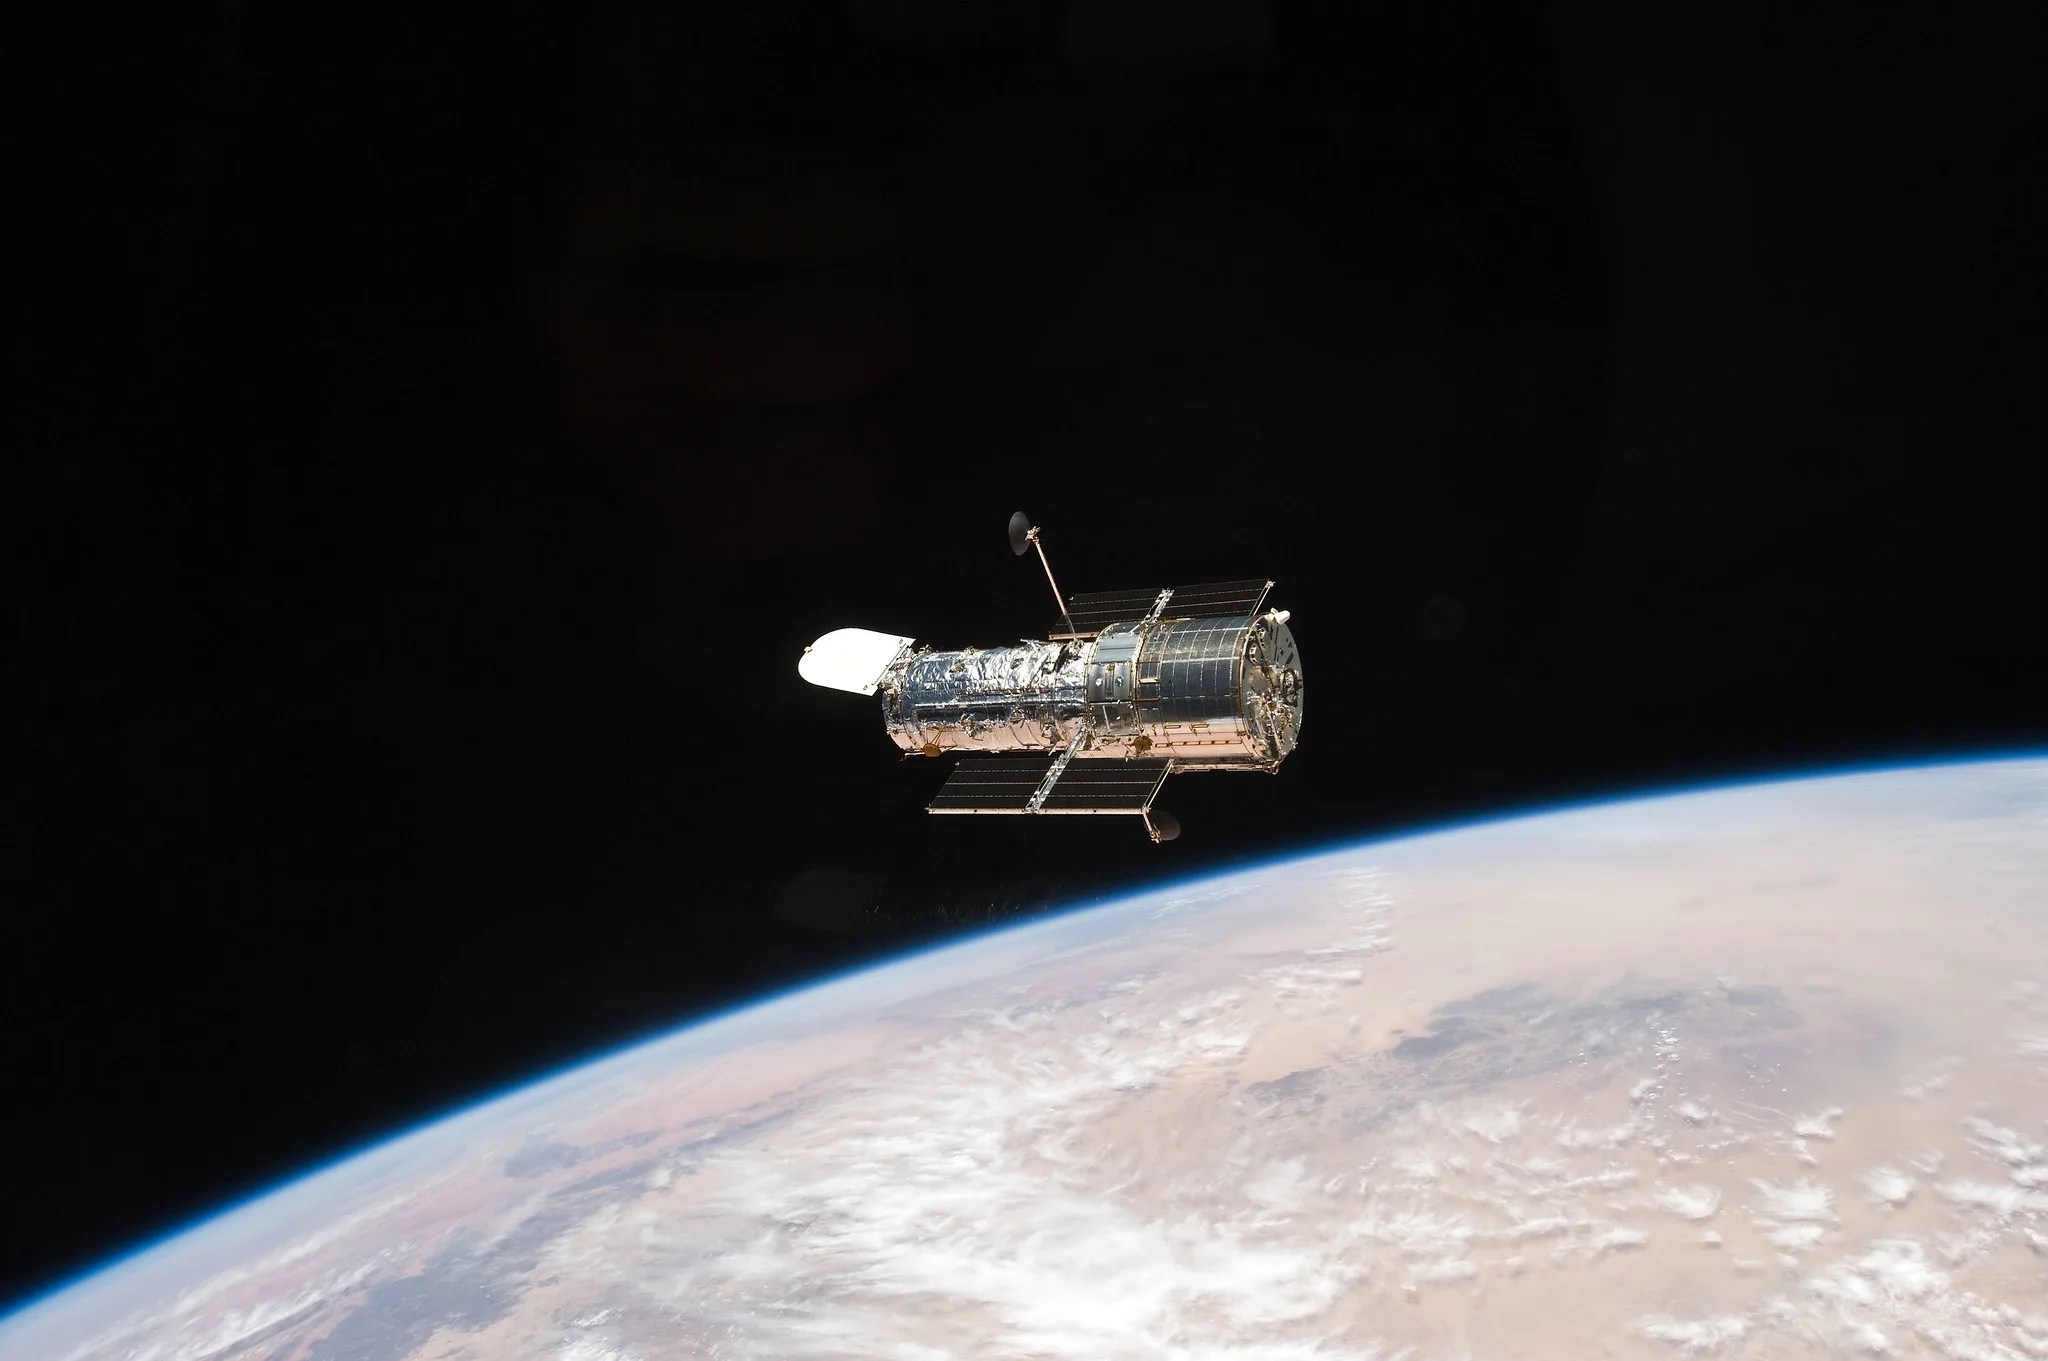 Hubble orbiting the Earth